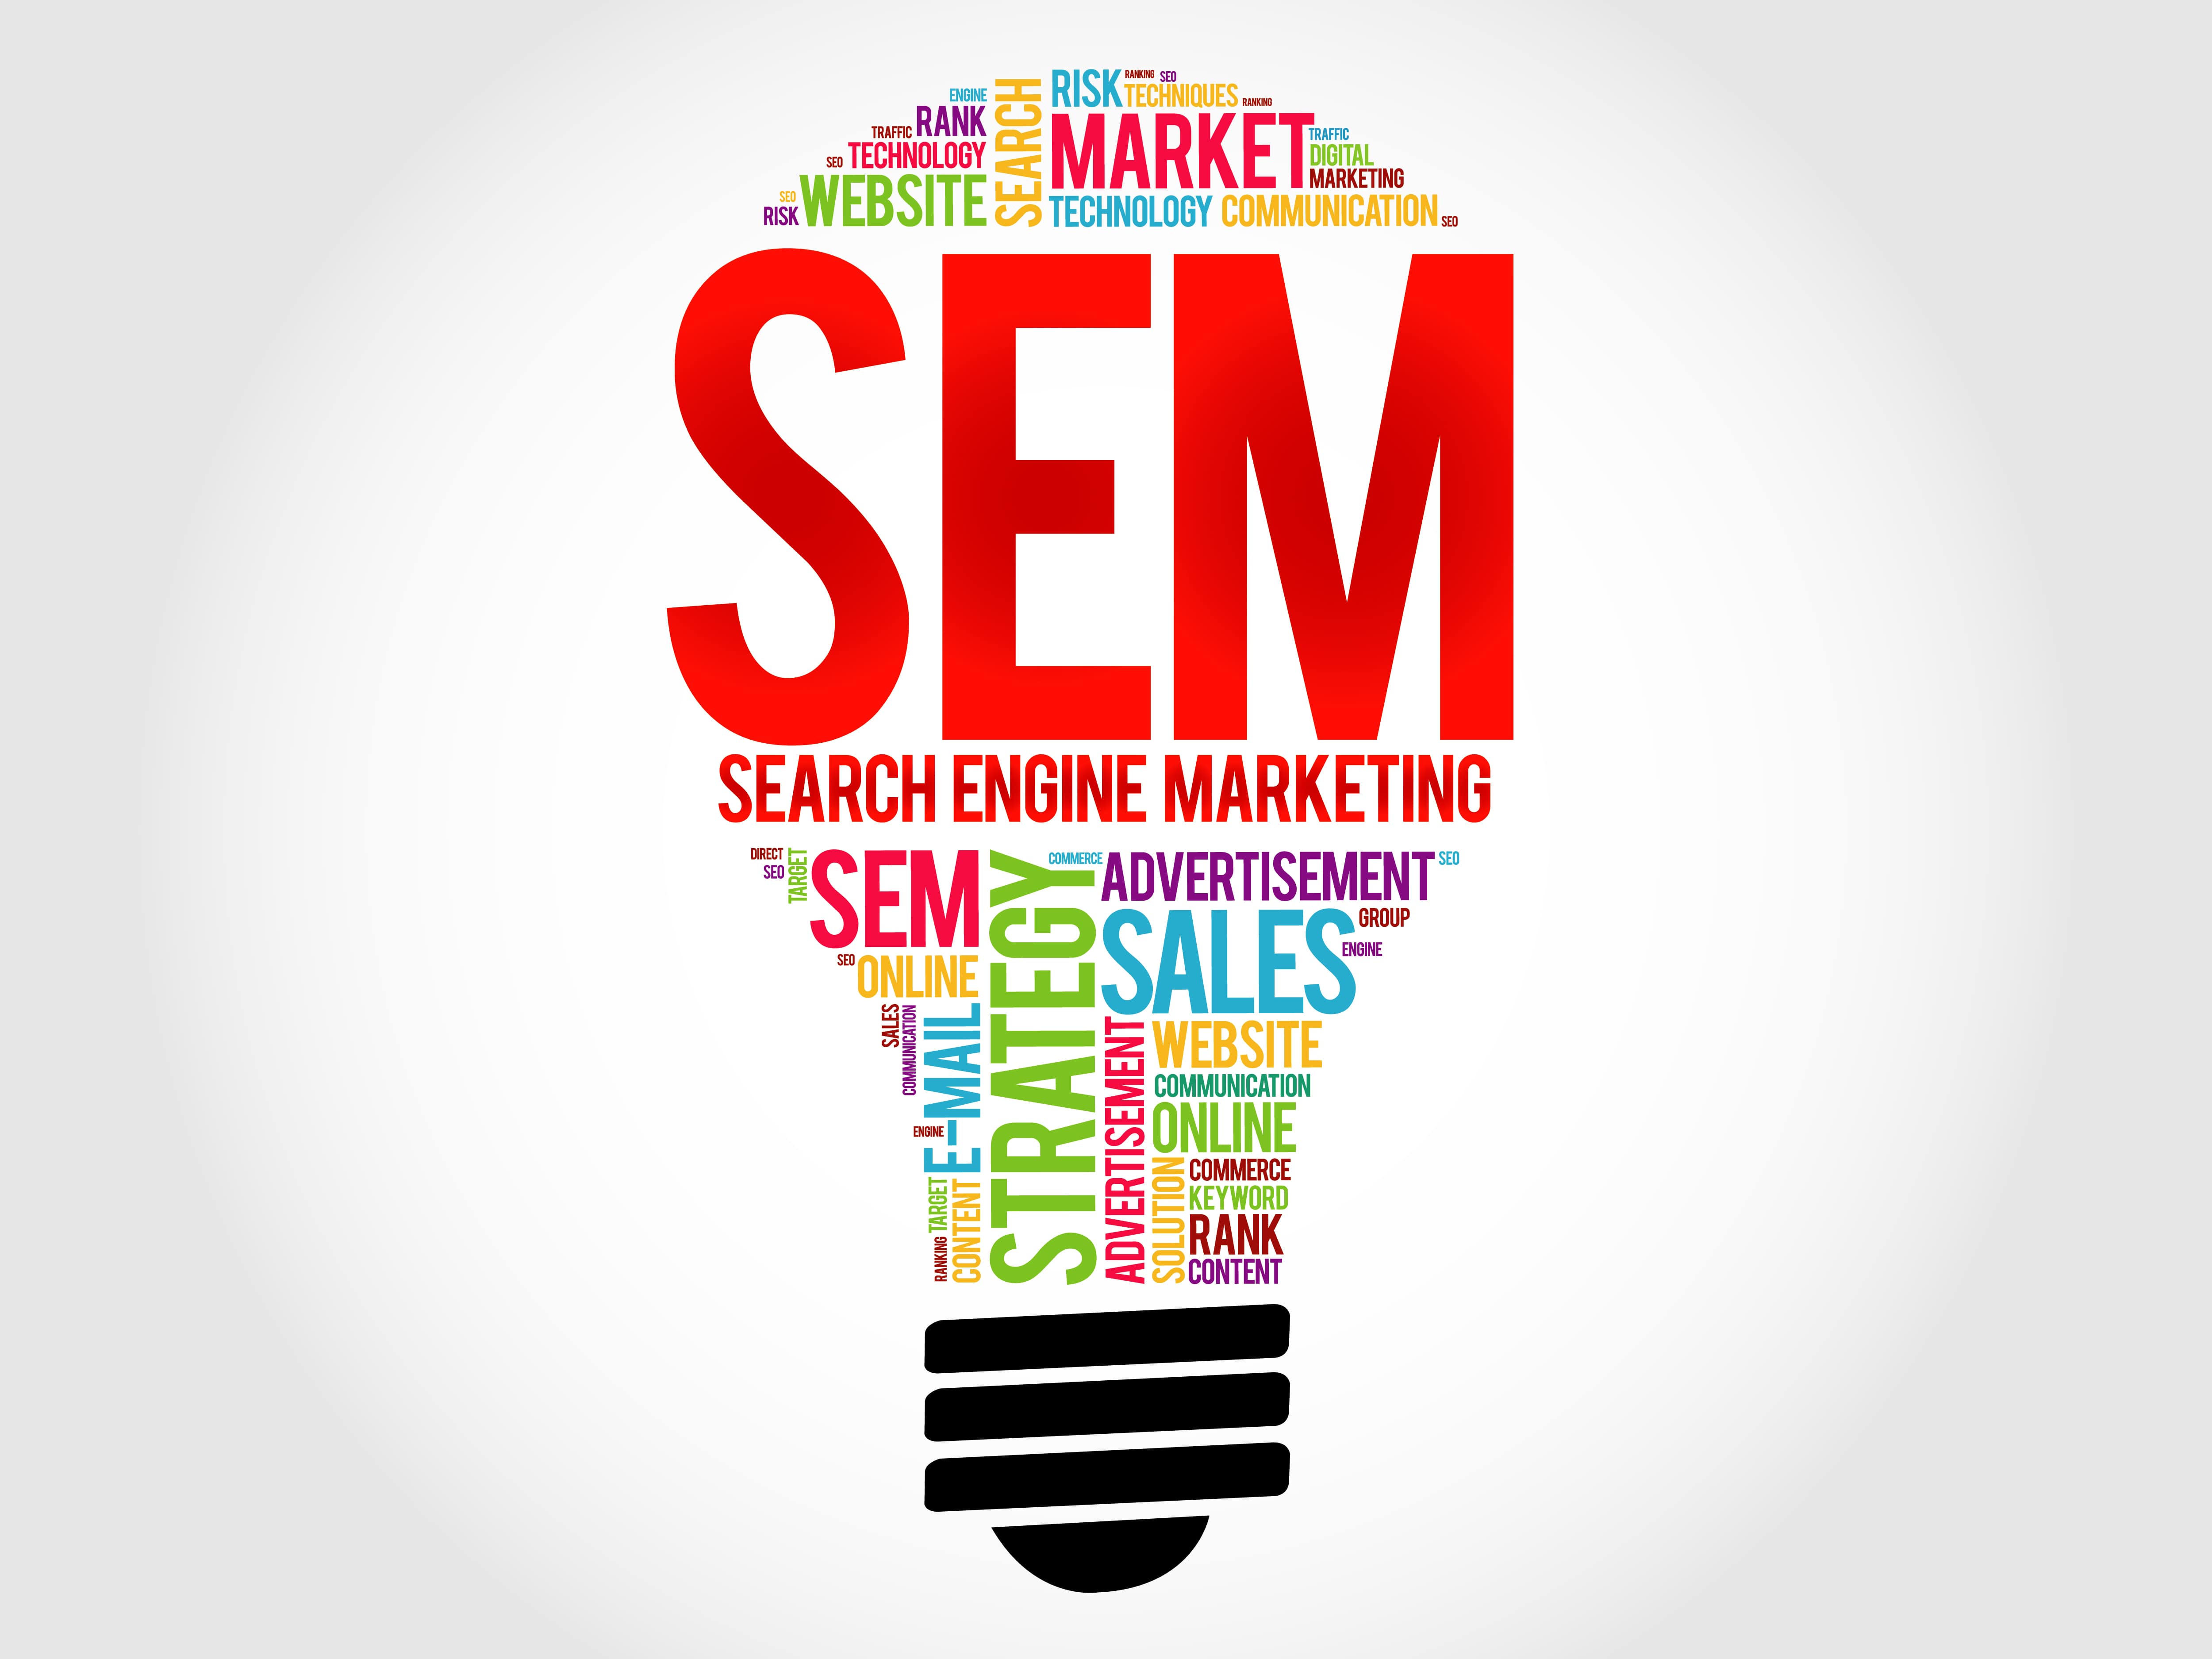 Connecting with potential customers through Search Engine Marketing